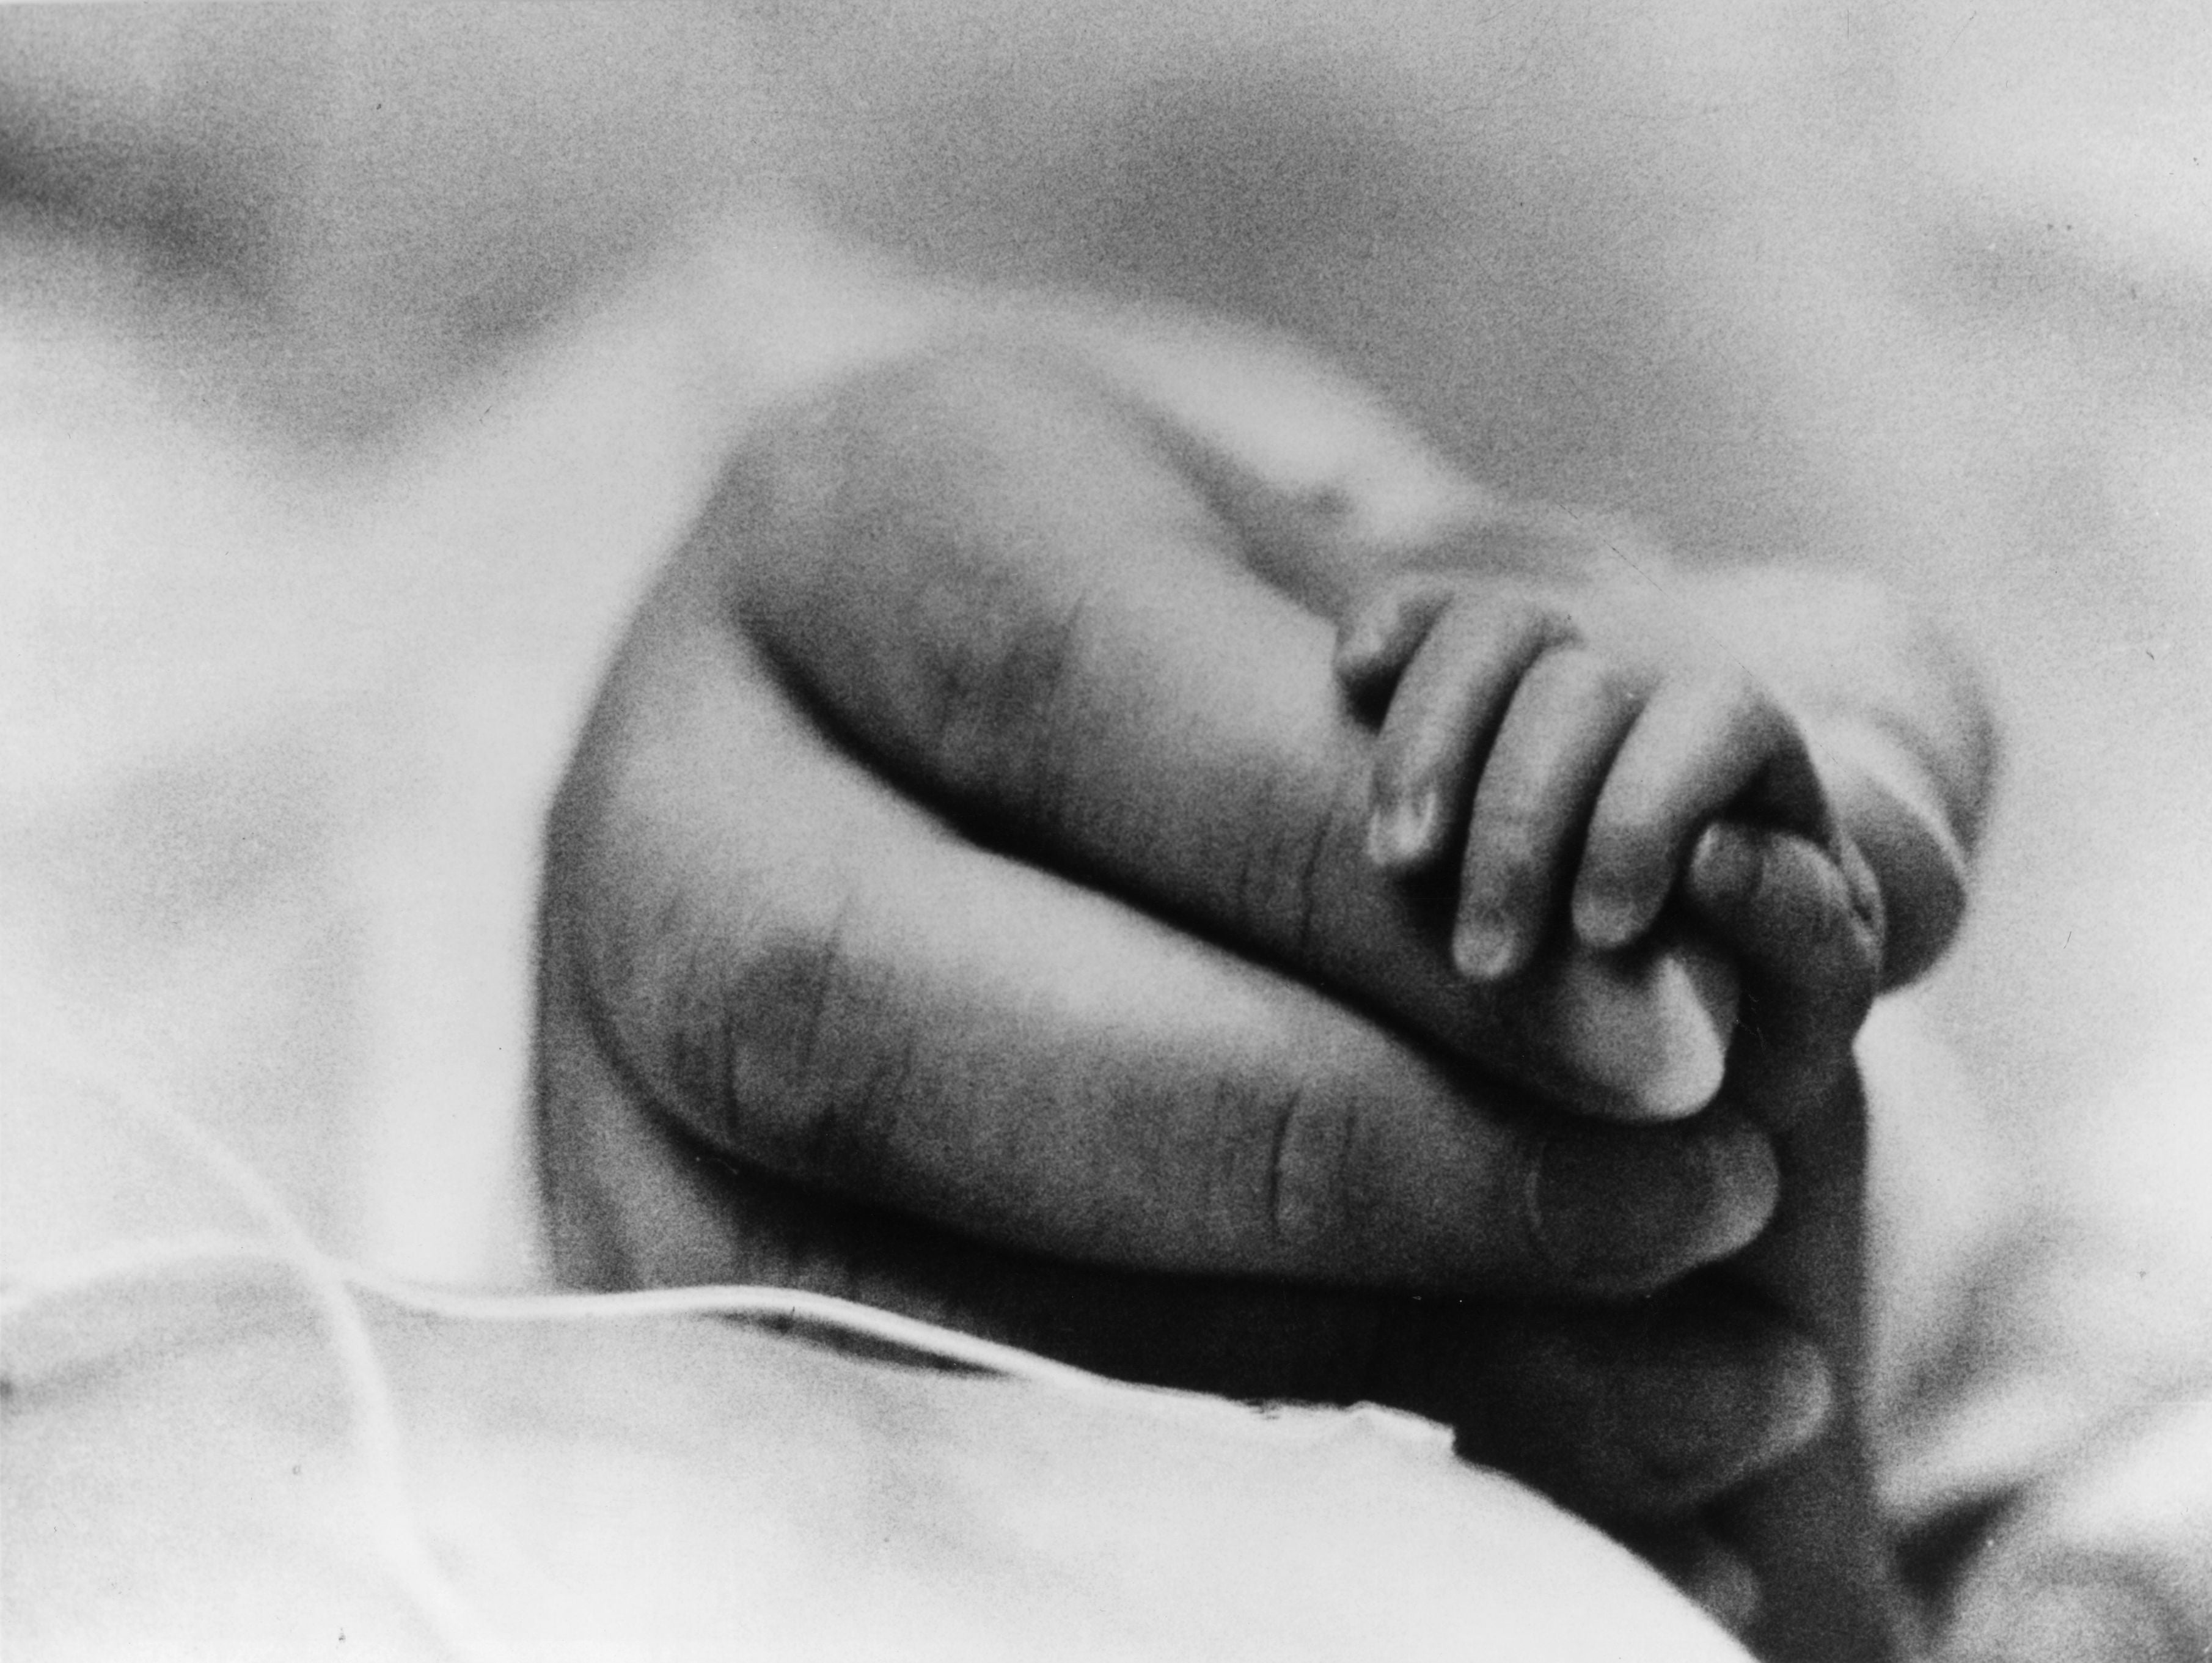 More and more babies are being born prematurely, according to the WHO